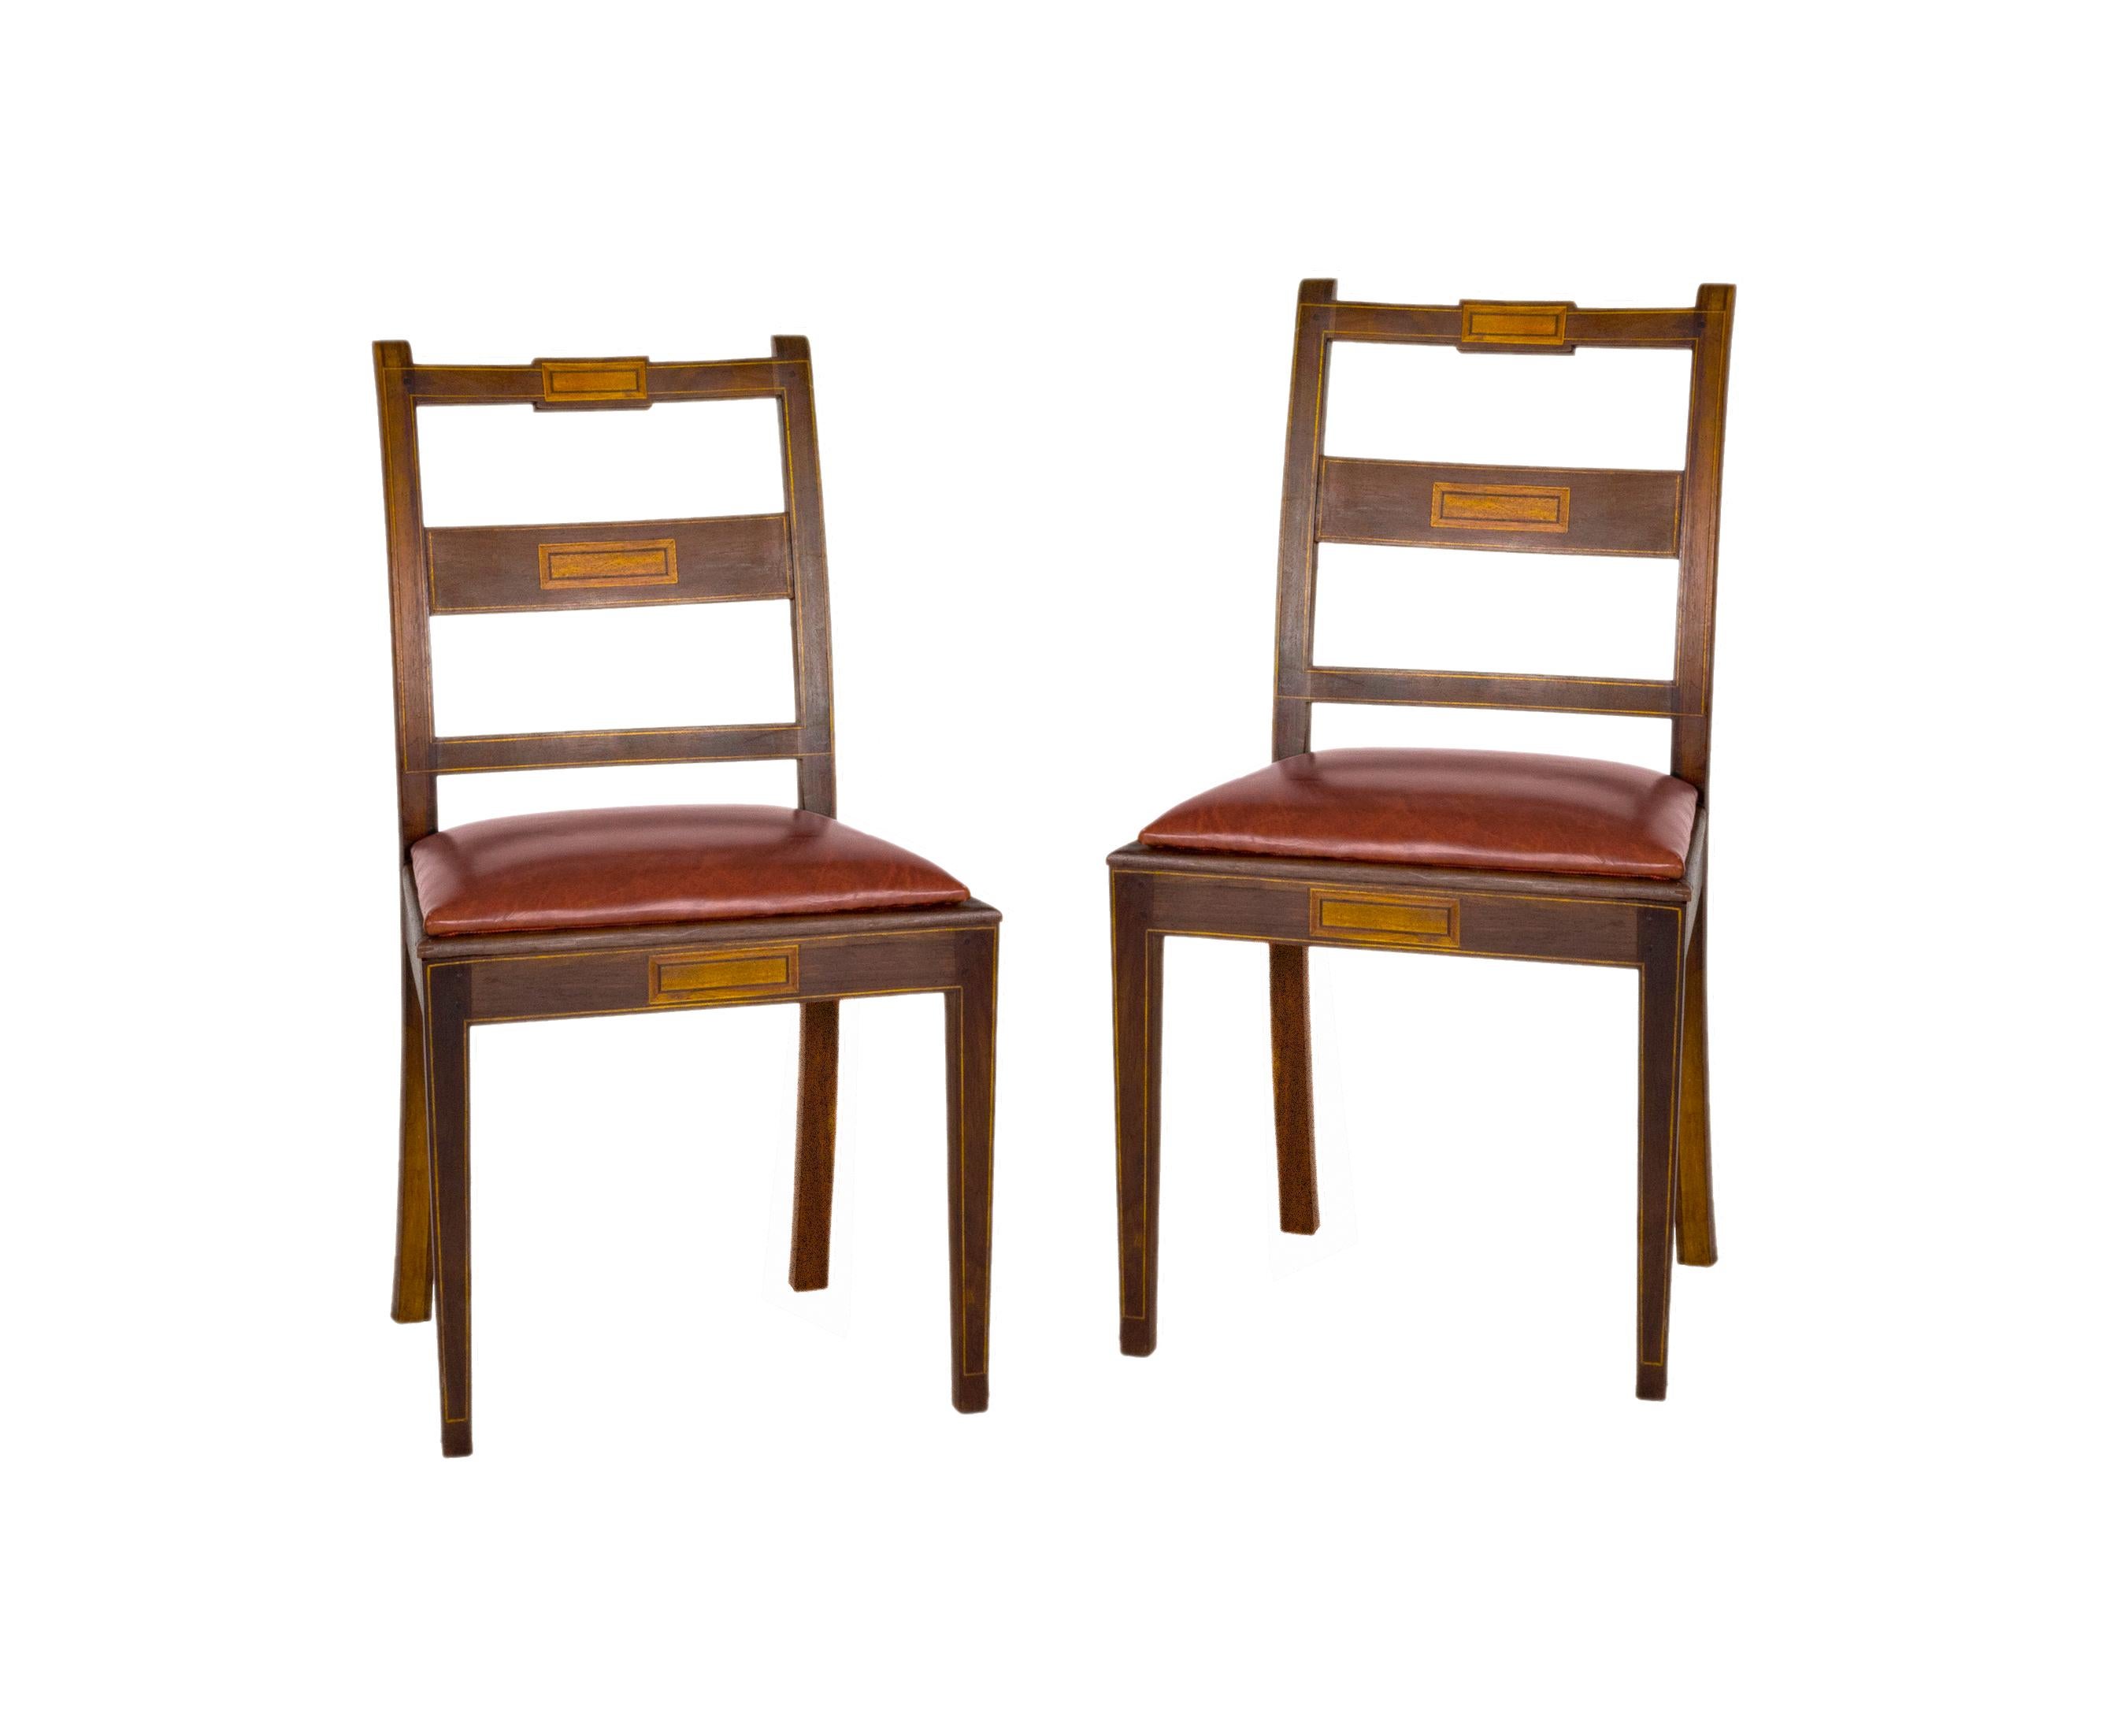 Set of Six Portuguese Chairs, Straw & Leather, 20th Century For Sale 1